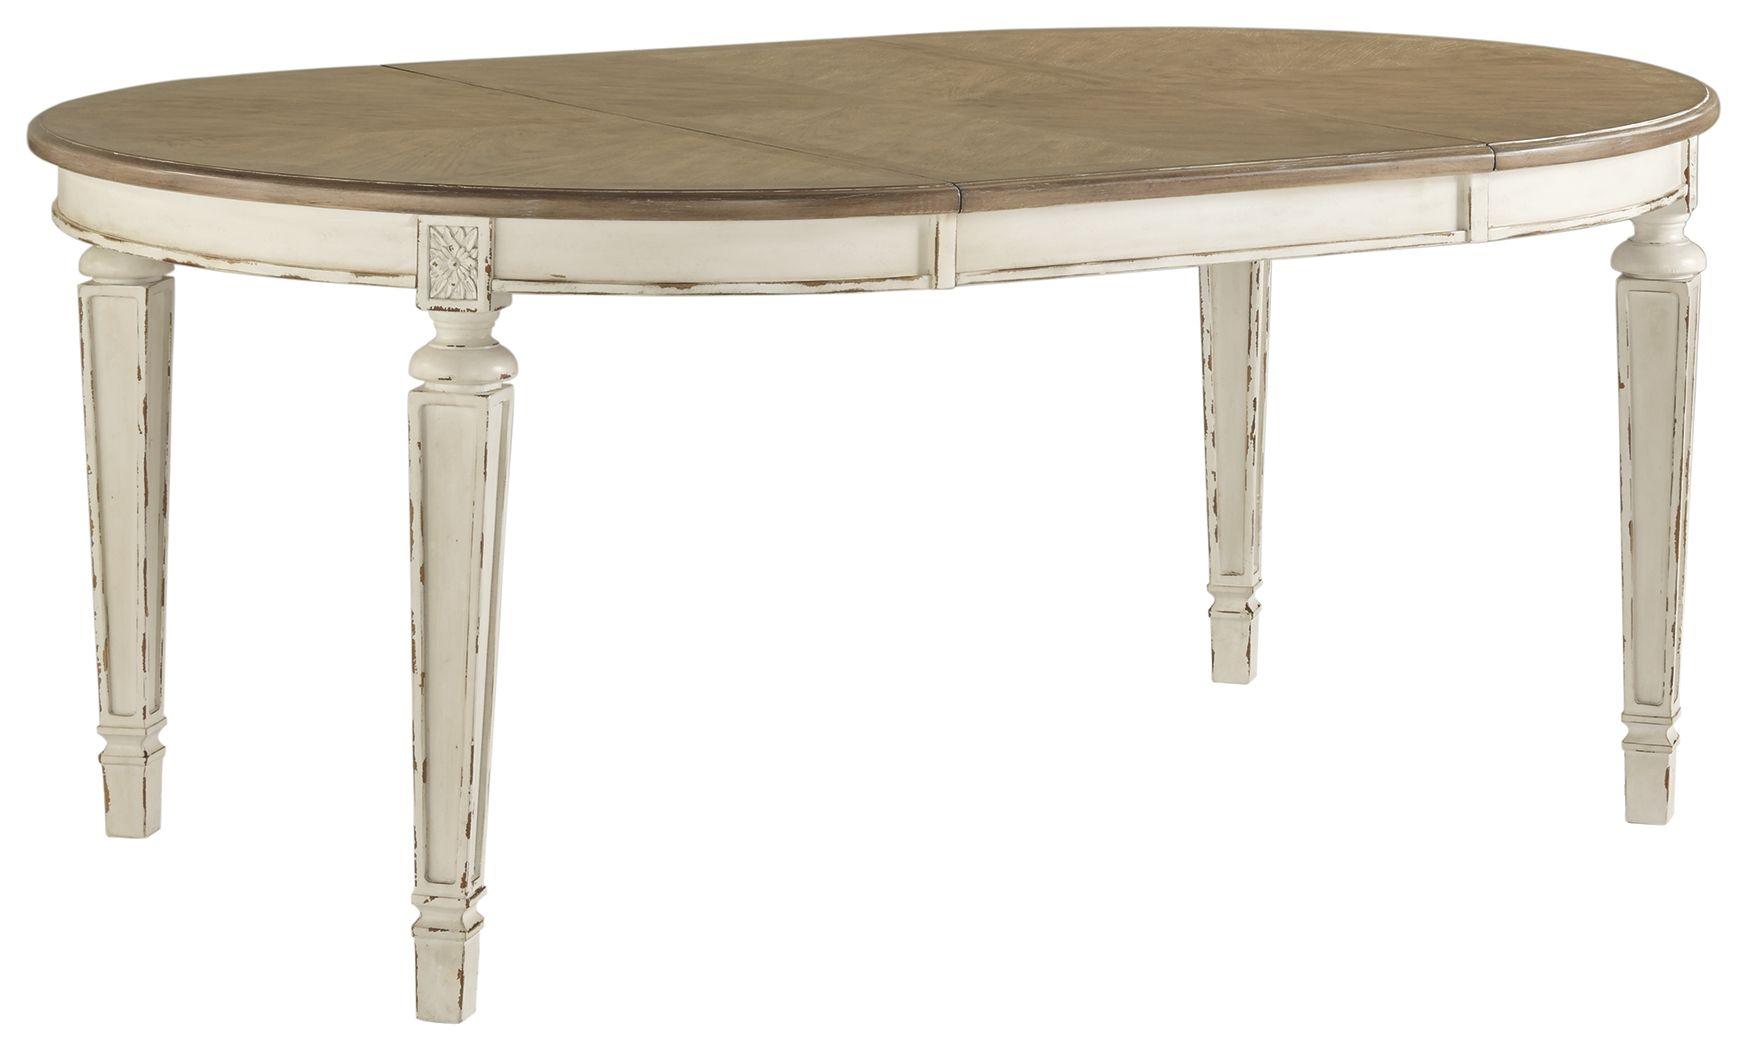 Ashley Furniture - Realyn - Chipped White - Oval Dining Room Extension Table - 5th Avenue Furniture